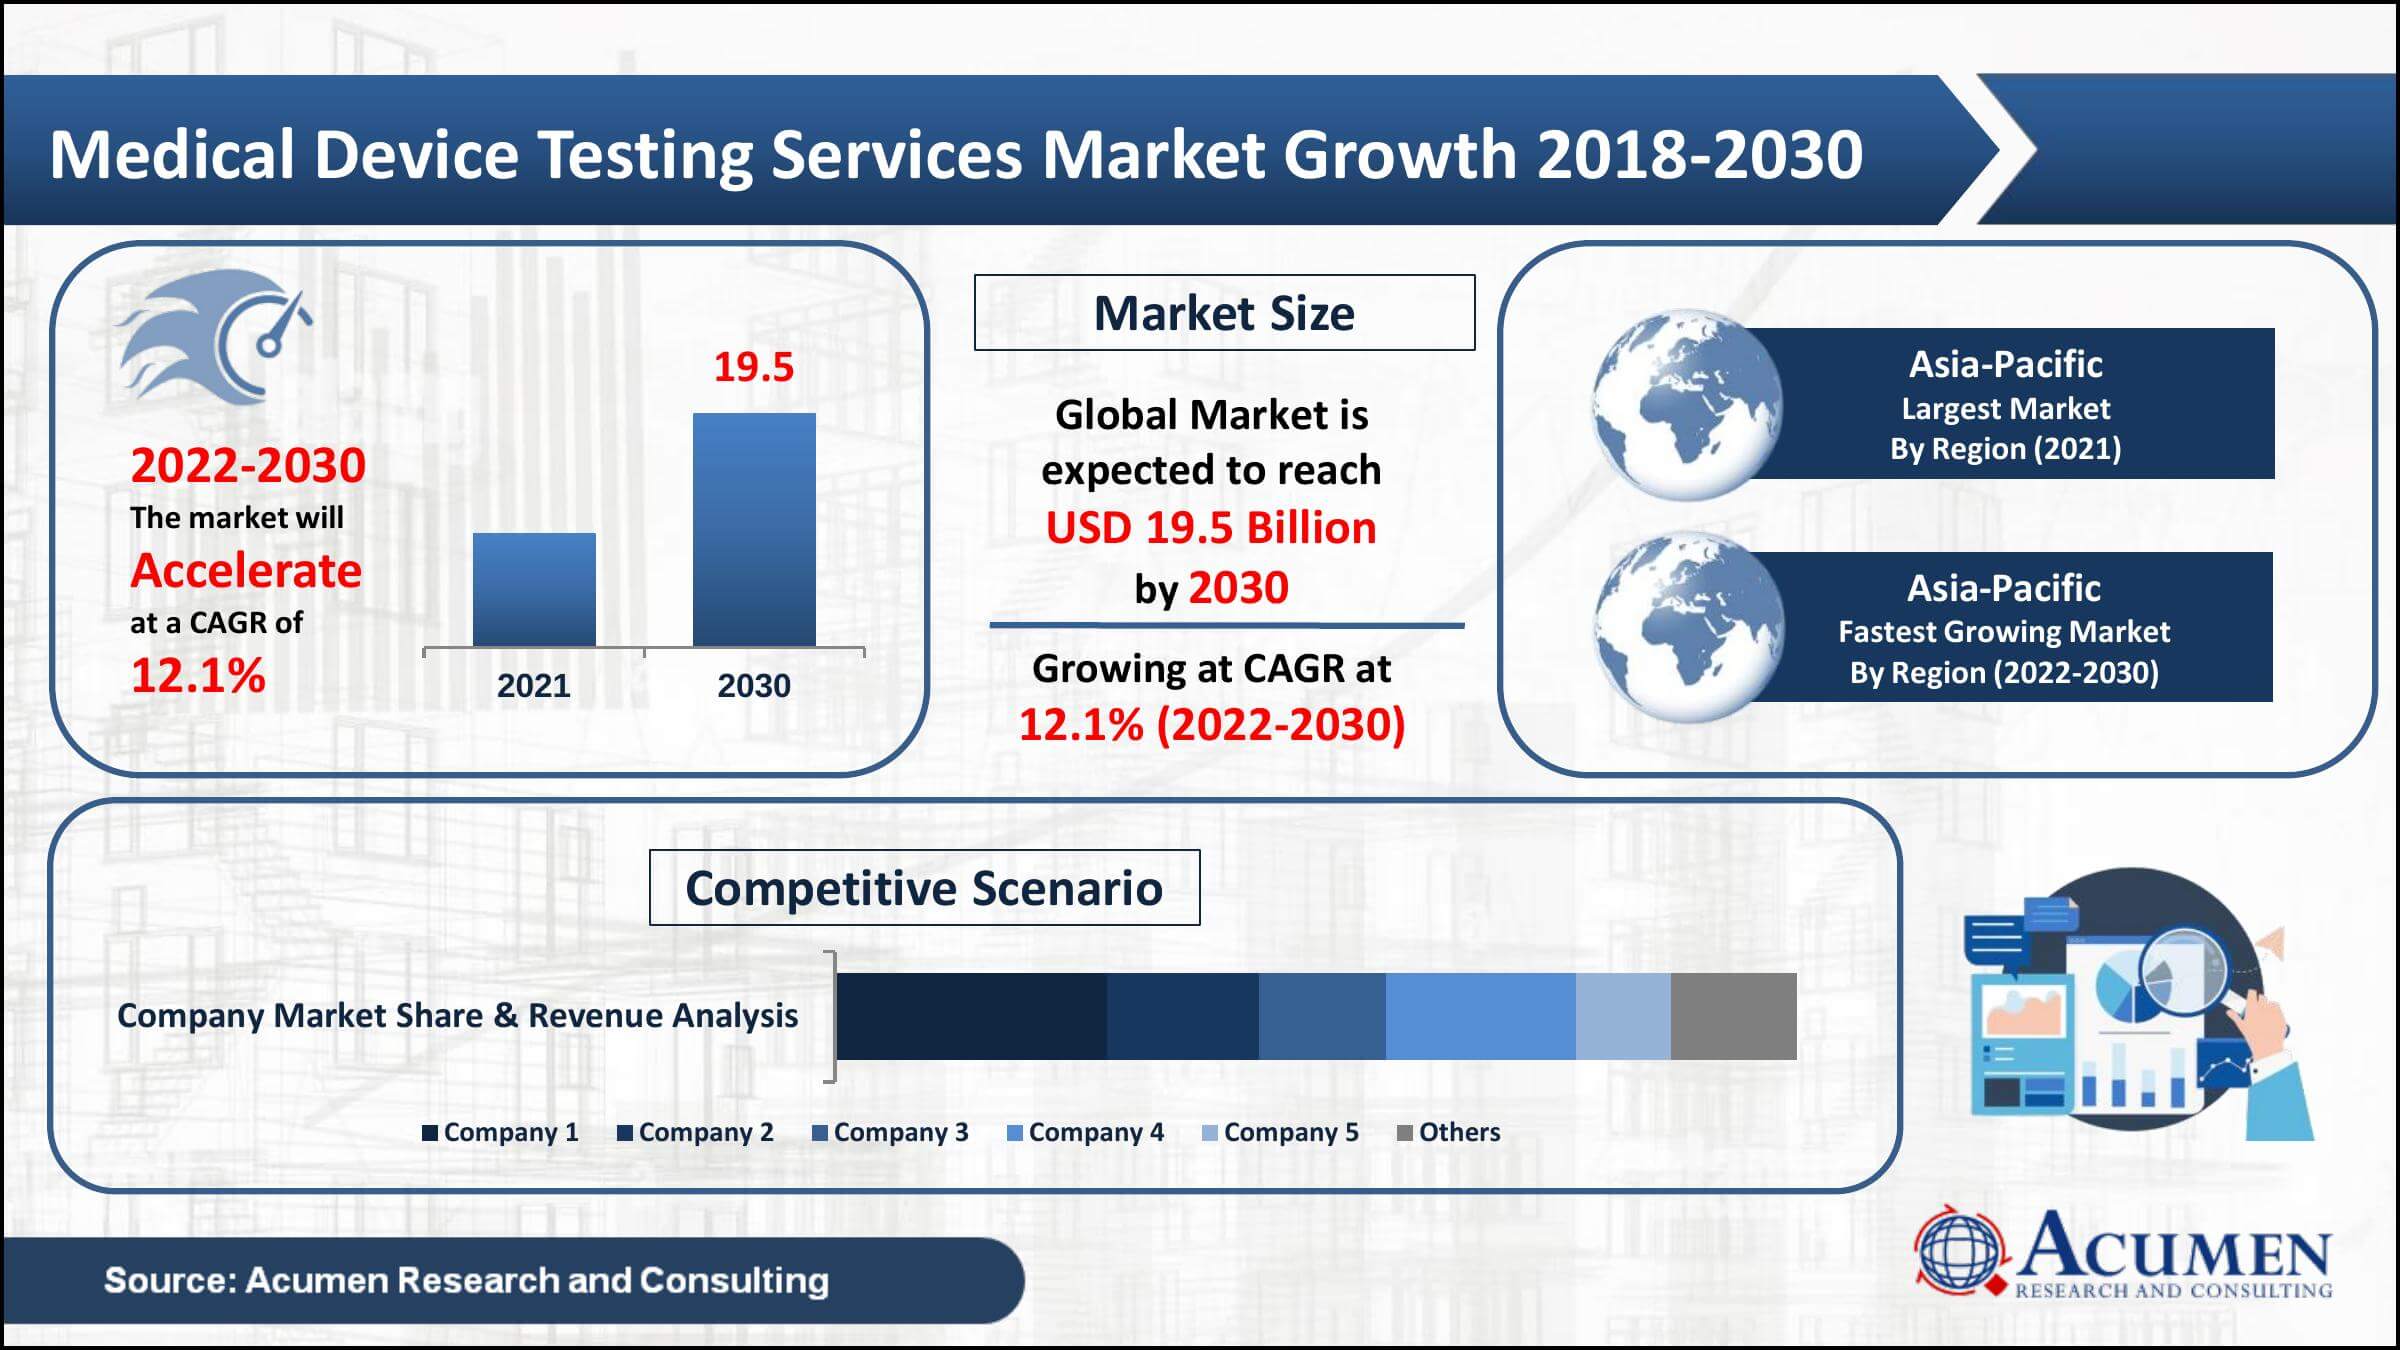 Global medical device testing services market value was worth USD 7.1 Billion in 2021, with a 12.1% CAGR from 2022 to 2030